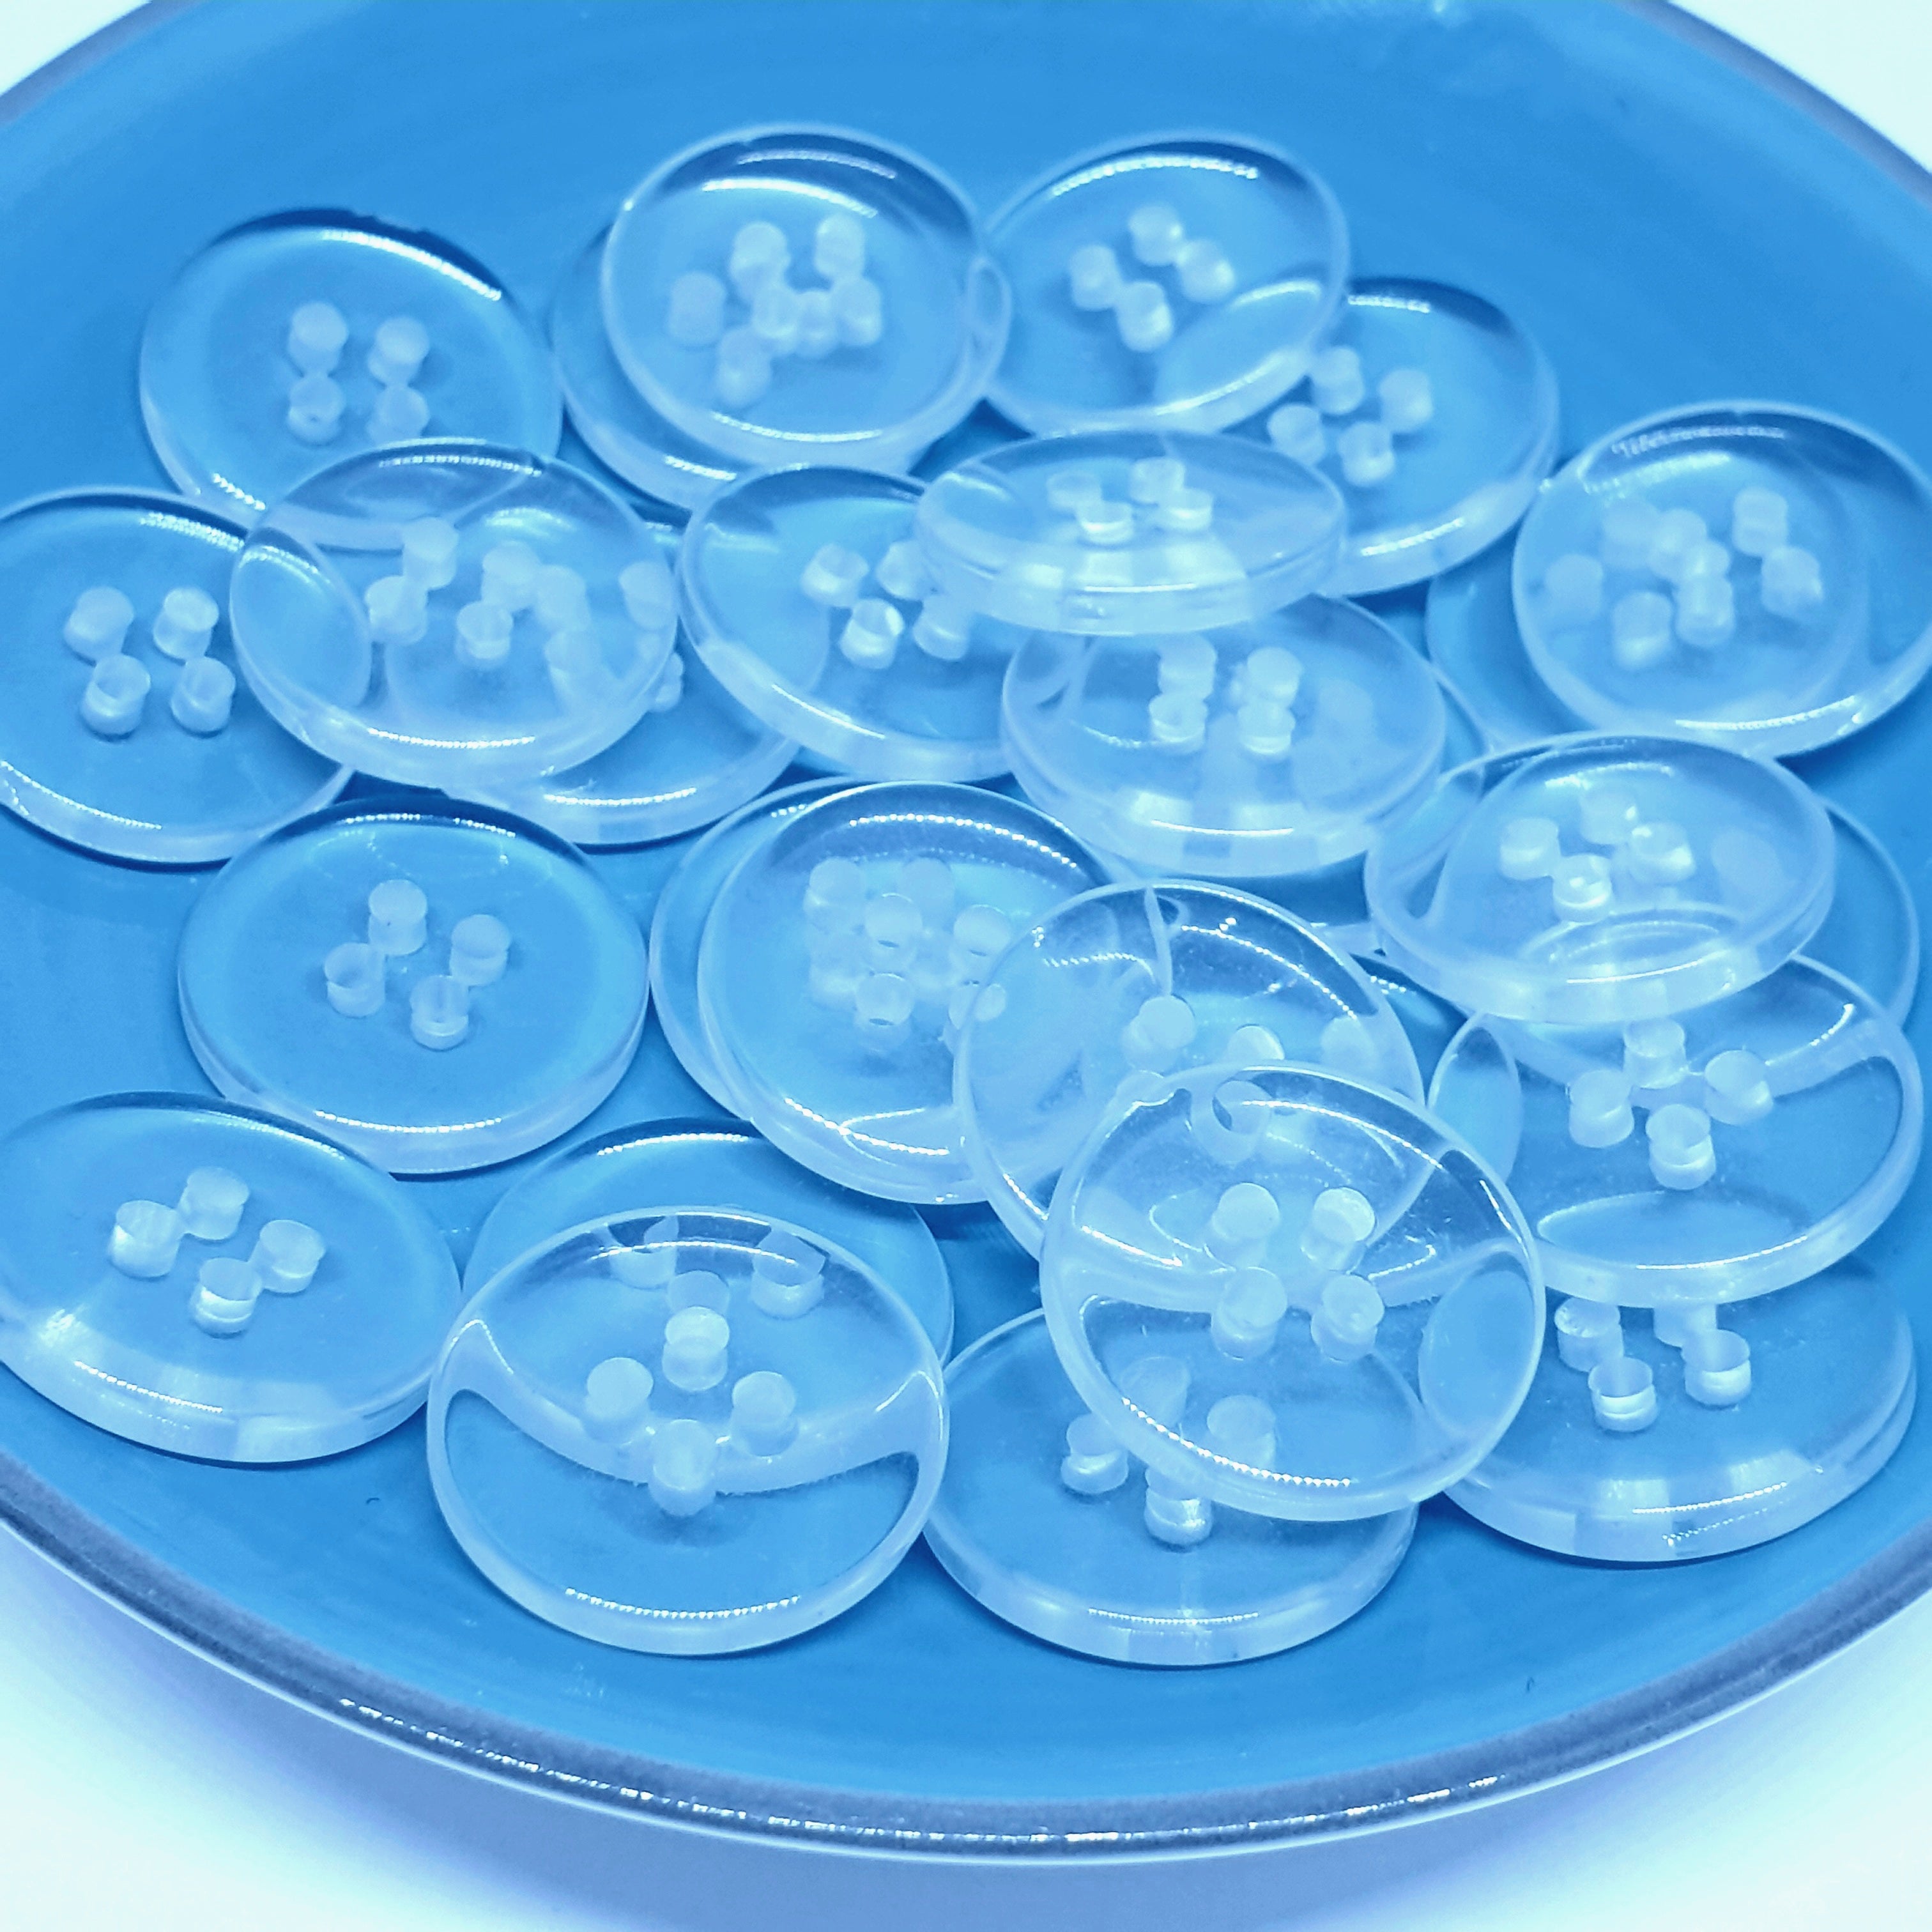 MajorCrafts 50pcs 18mm Transparent Clear 4 Holes Round Resin Sewing Buttons